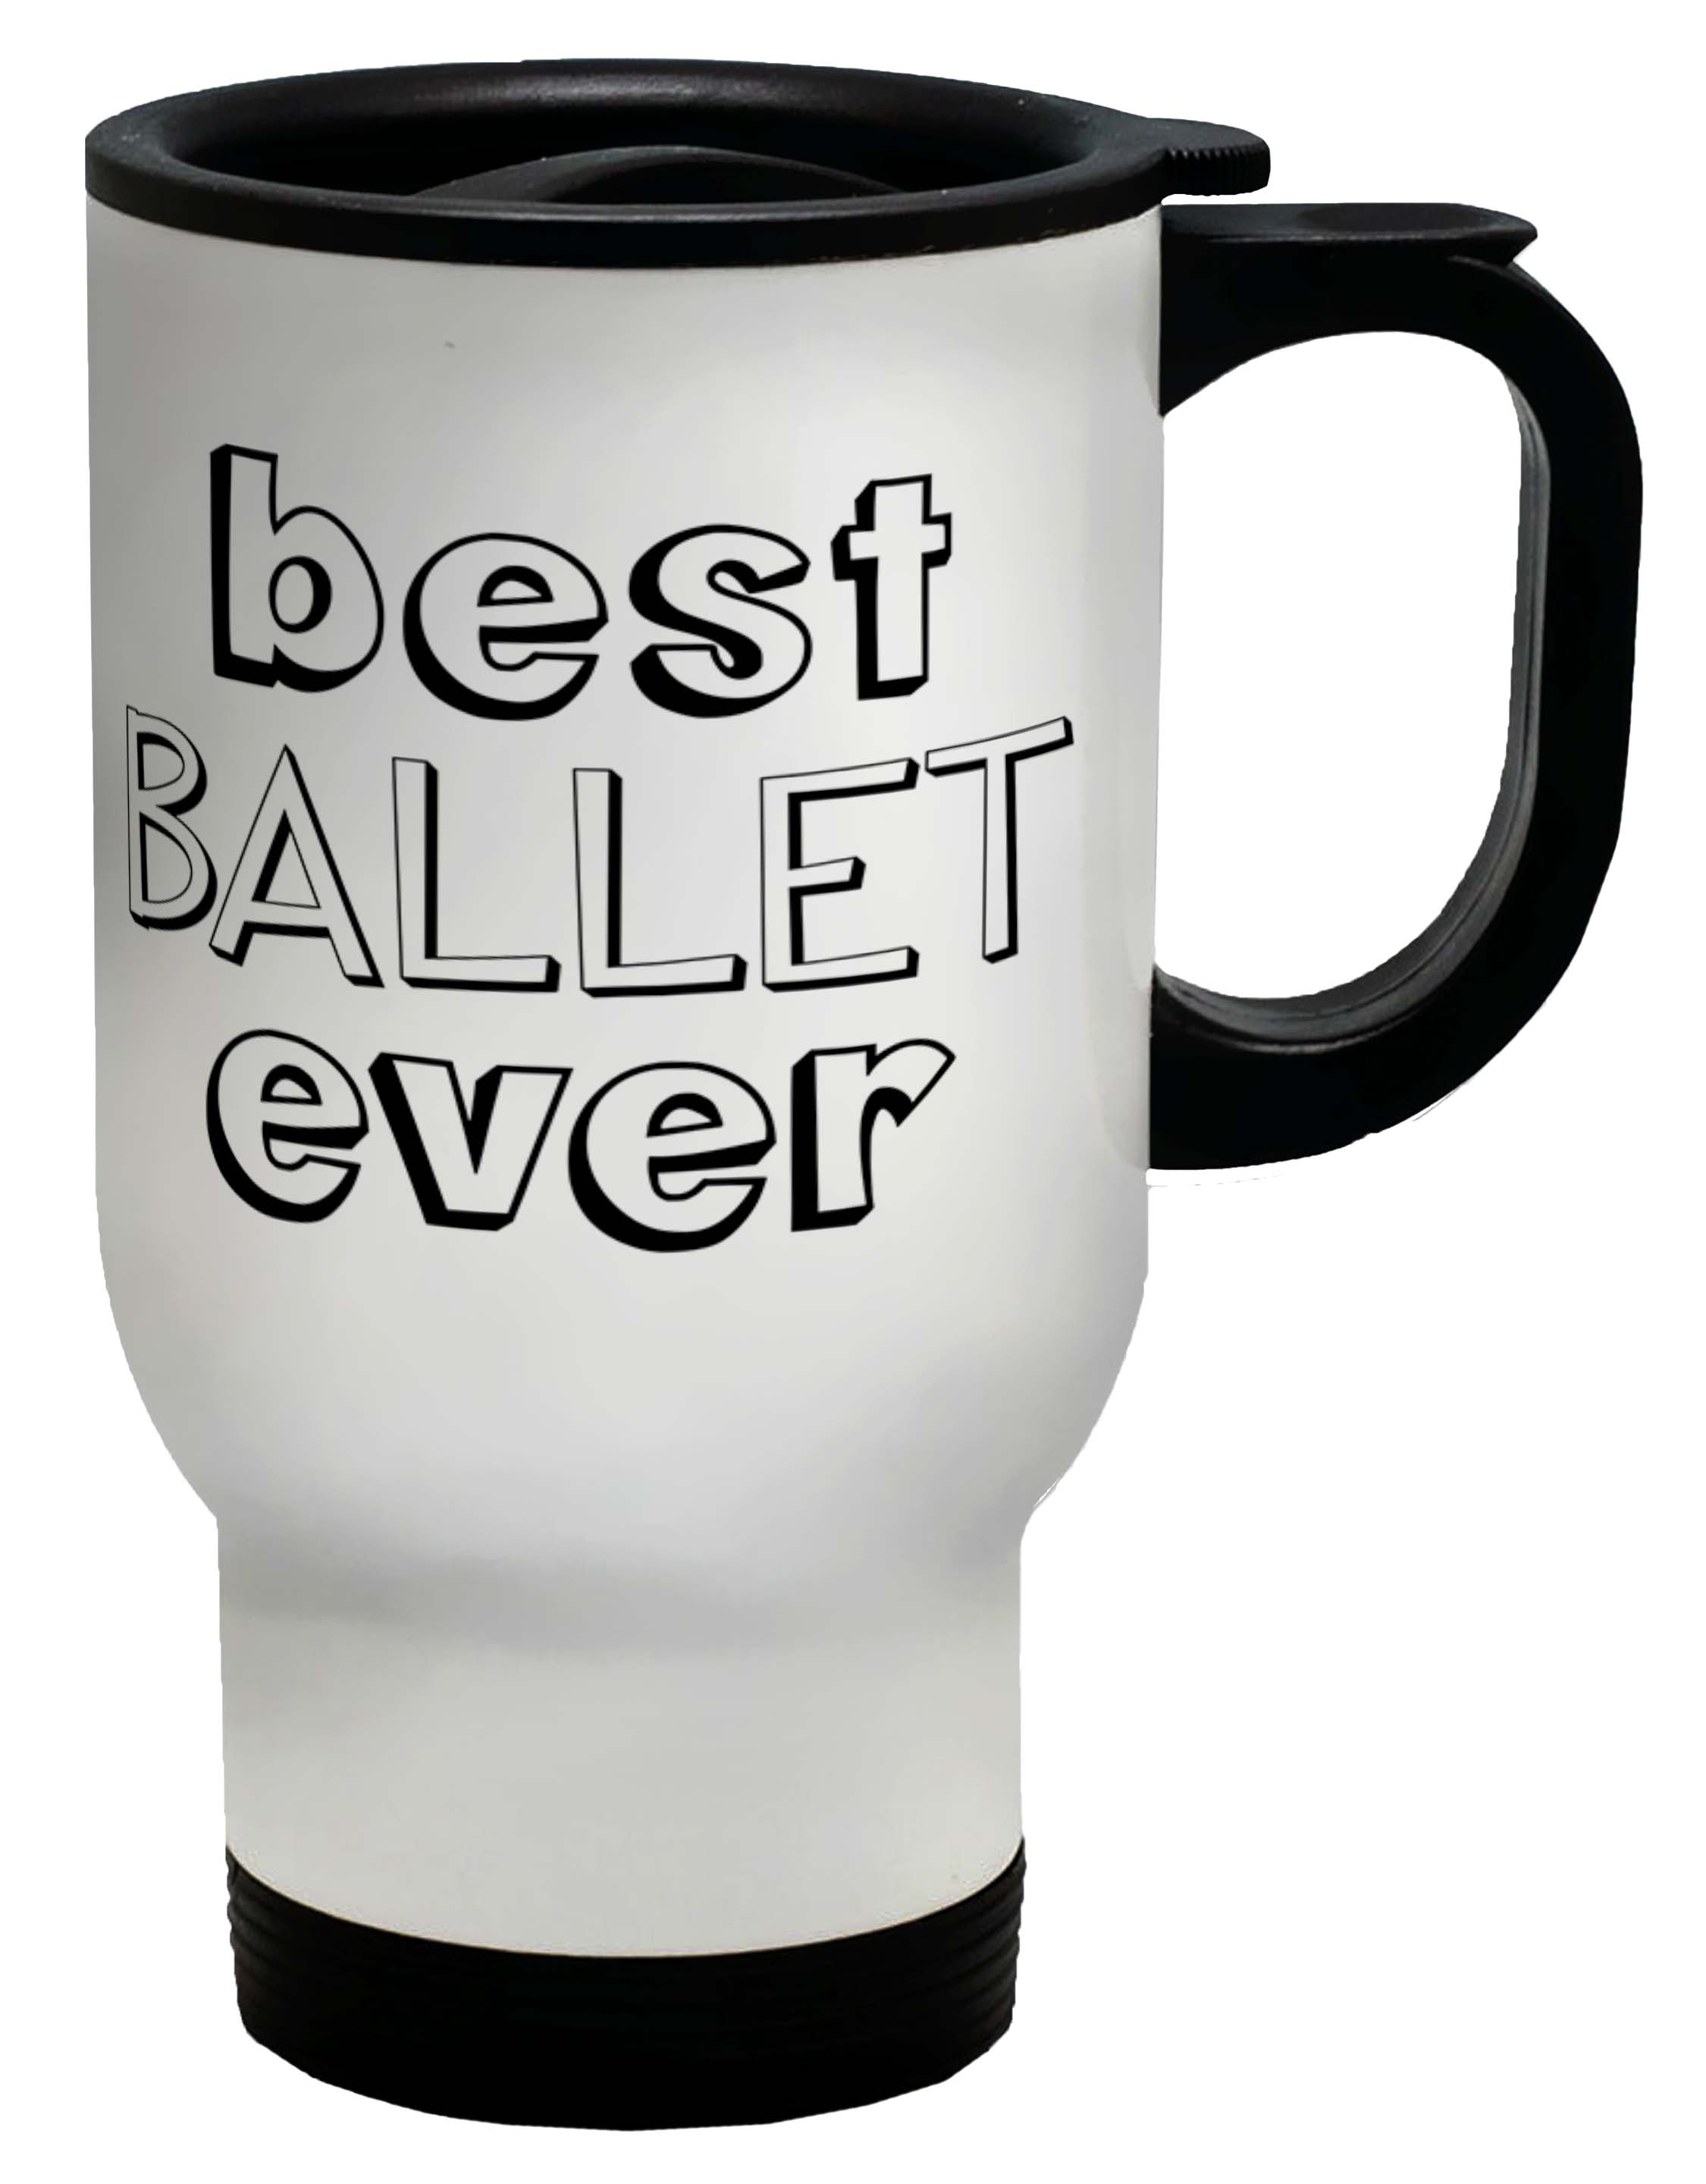 Best Ballet Ever Travel Mug Cup - Picture 1 of 1